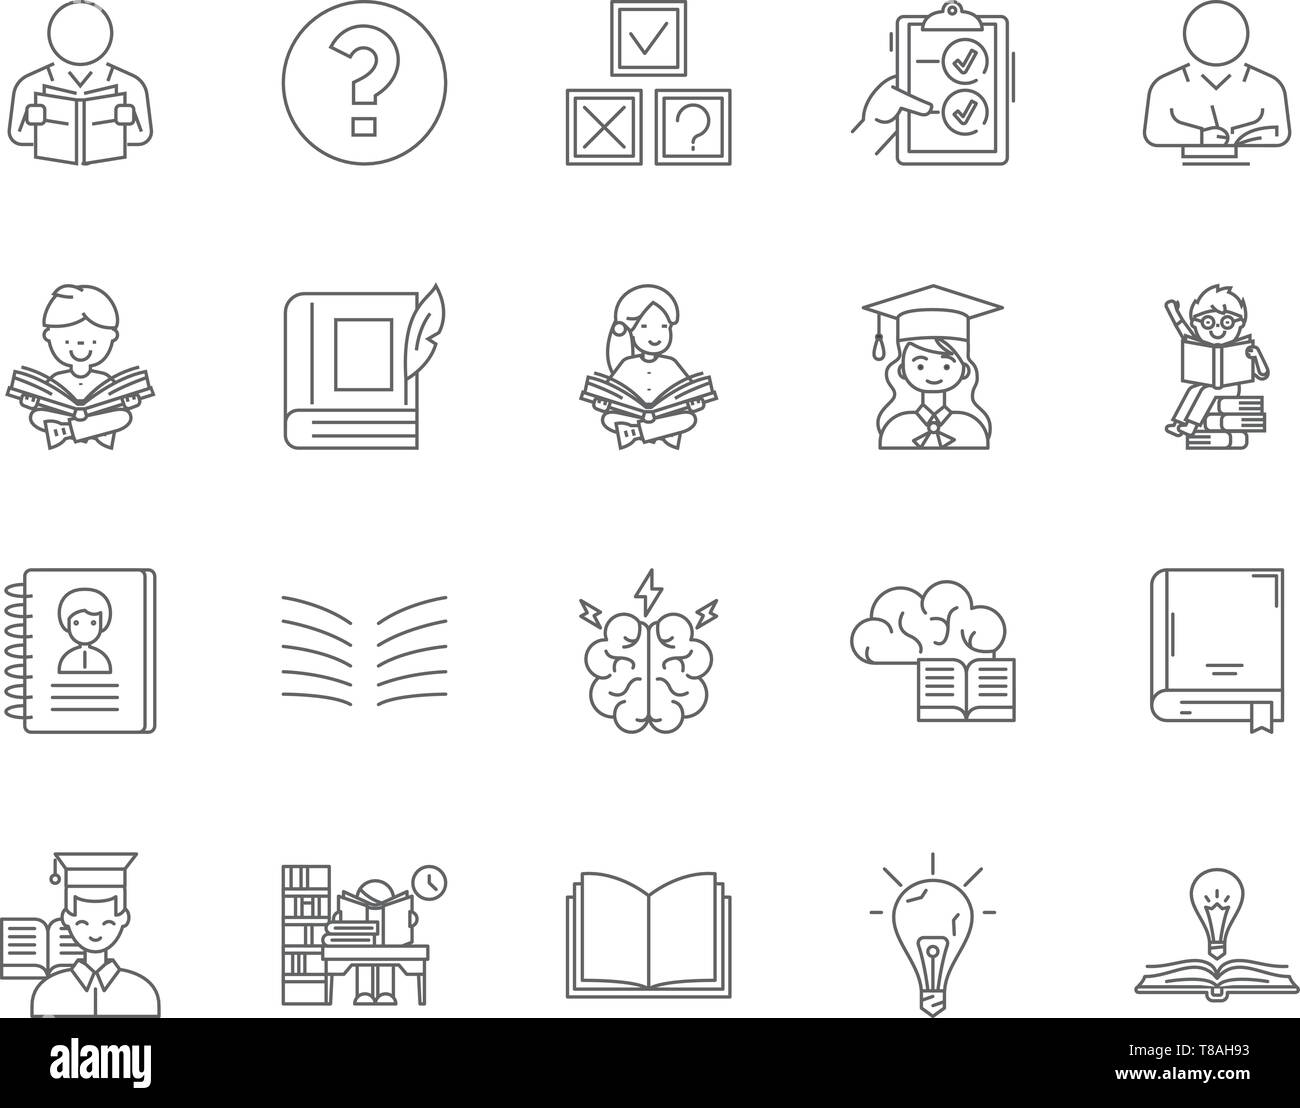 Exam line icons, signs, vector set, outline illustration concept  Stock Vector